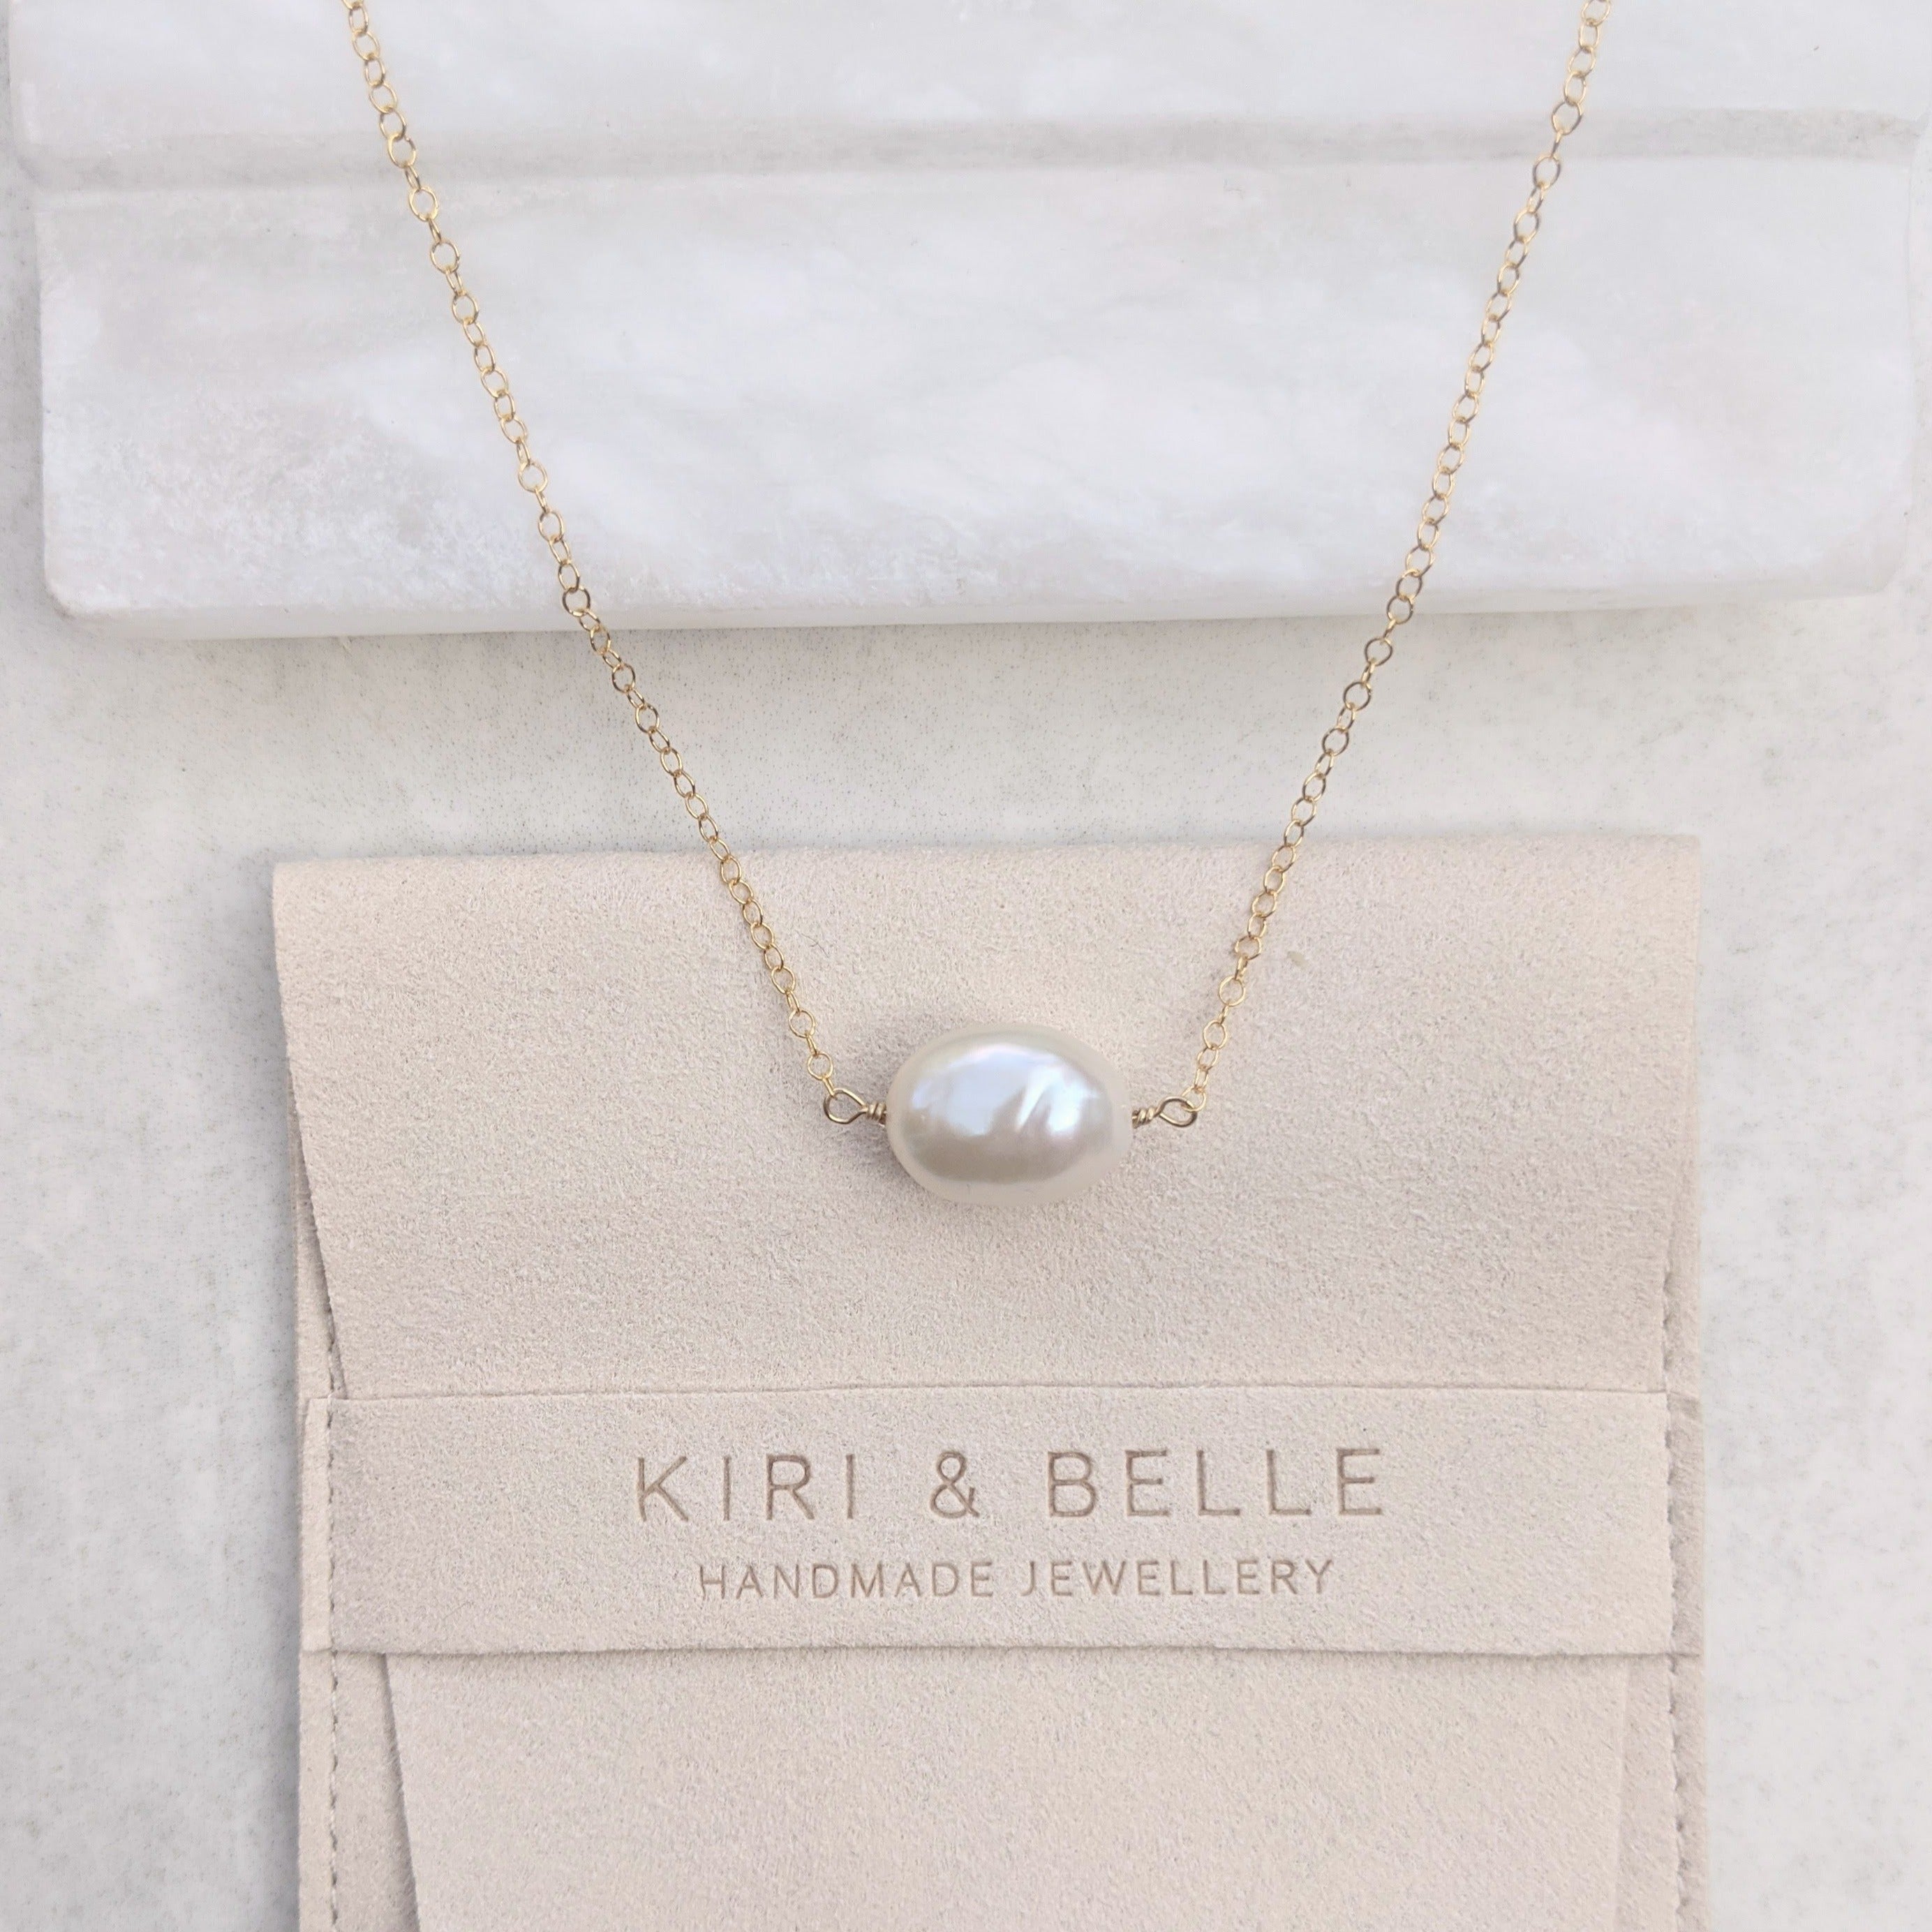 Single horizontally strung large baroque pearl on a fine gold chain necklace